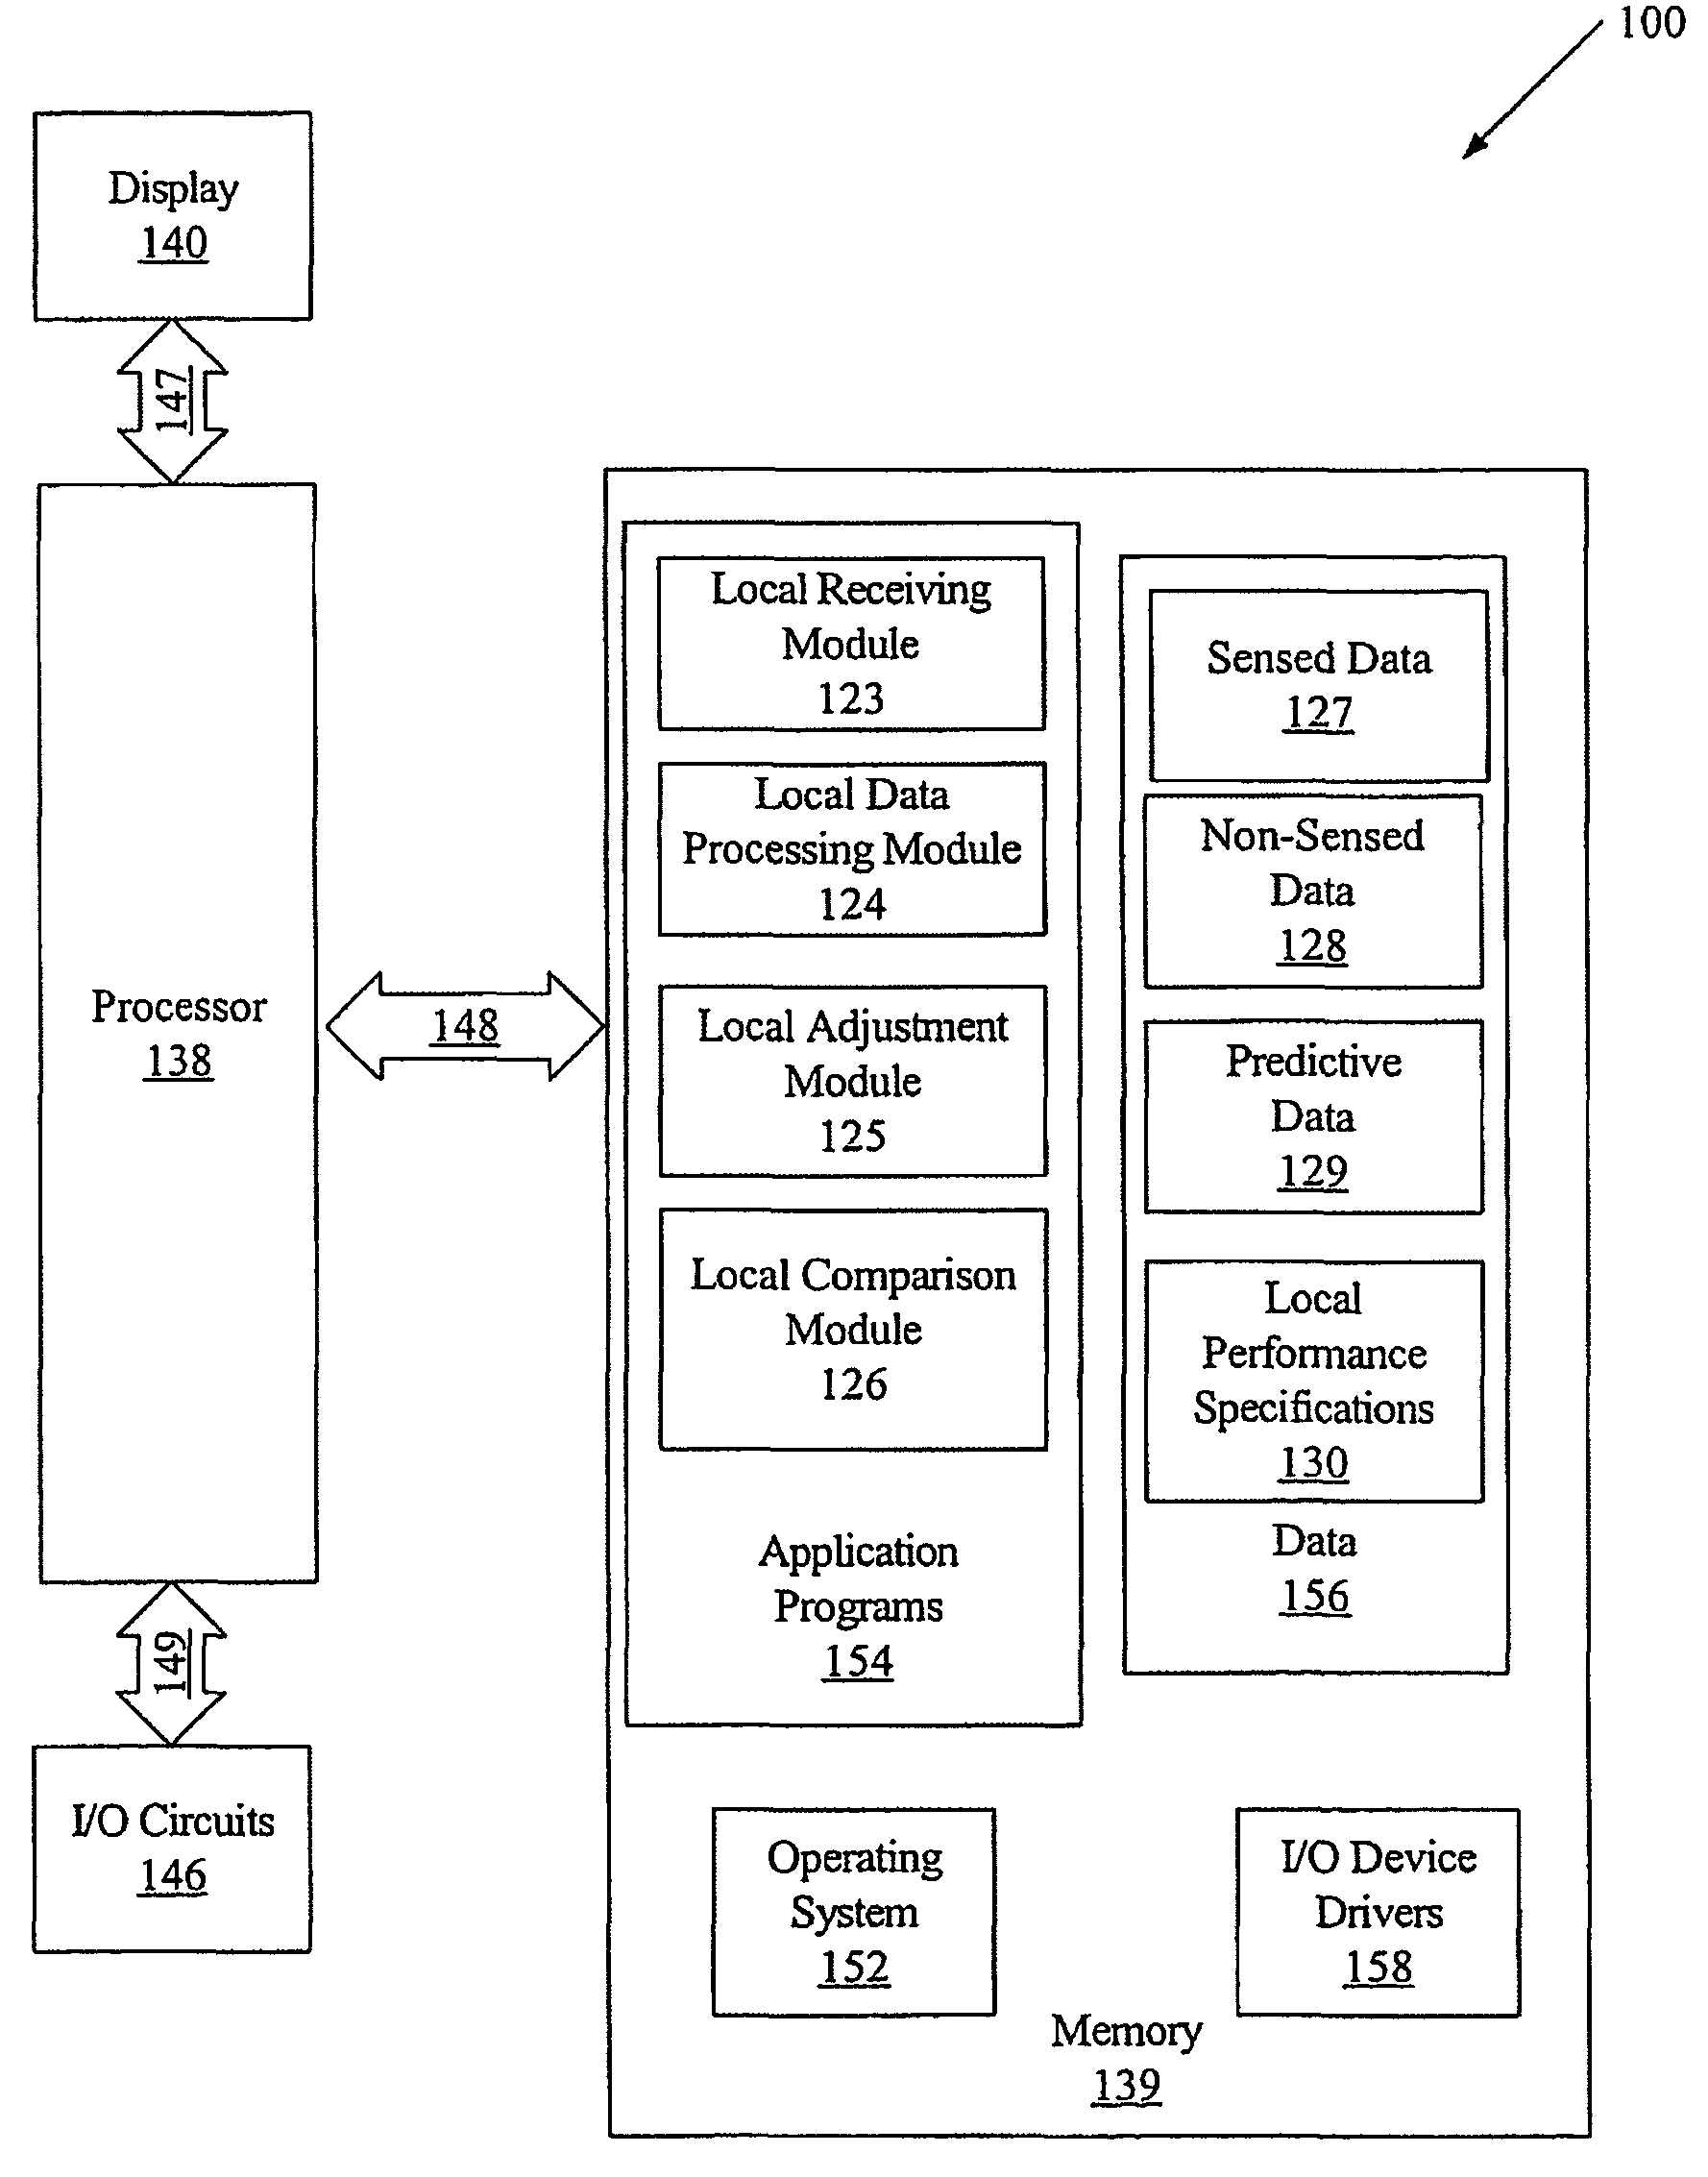 Methods, systems and computer program products for controlling a climate in a building